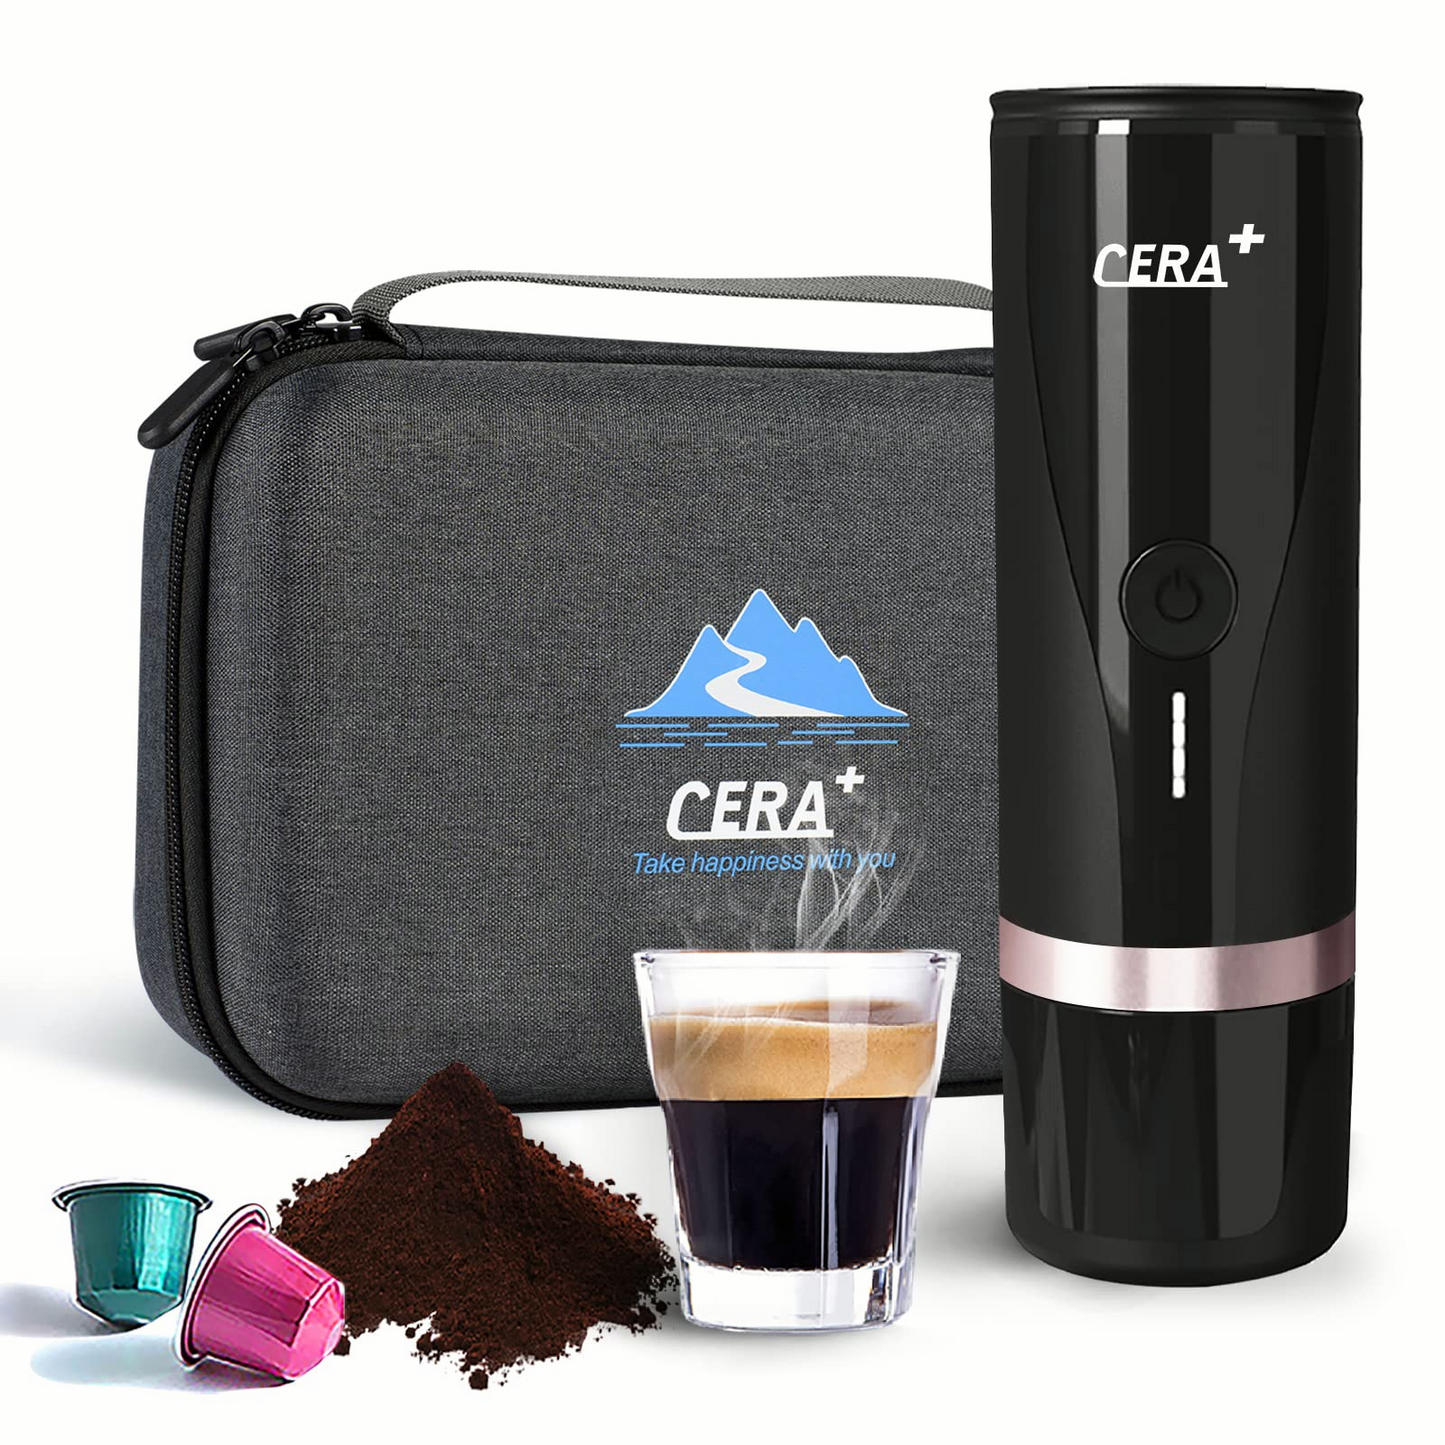 https://neso-pro.com/cdn/shop/products/PortableCoffeeMakerforTravel_3-4minsSelf-Heating20BarRechargeableMiniCampingEspressoMachine_CompatiblewithNSPods_GroundCoffeeforHome_Office_OutdoorCampaignwithCarryingCasebyNeso-Pro0.png?v=1659748983&width=1445